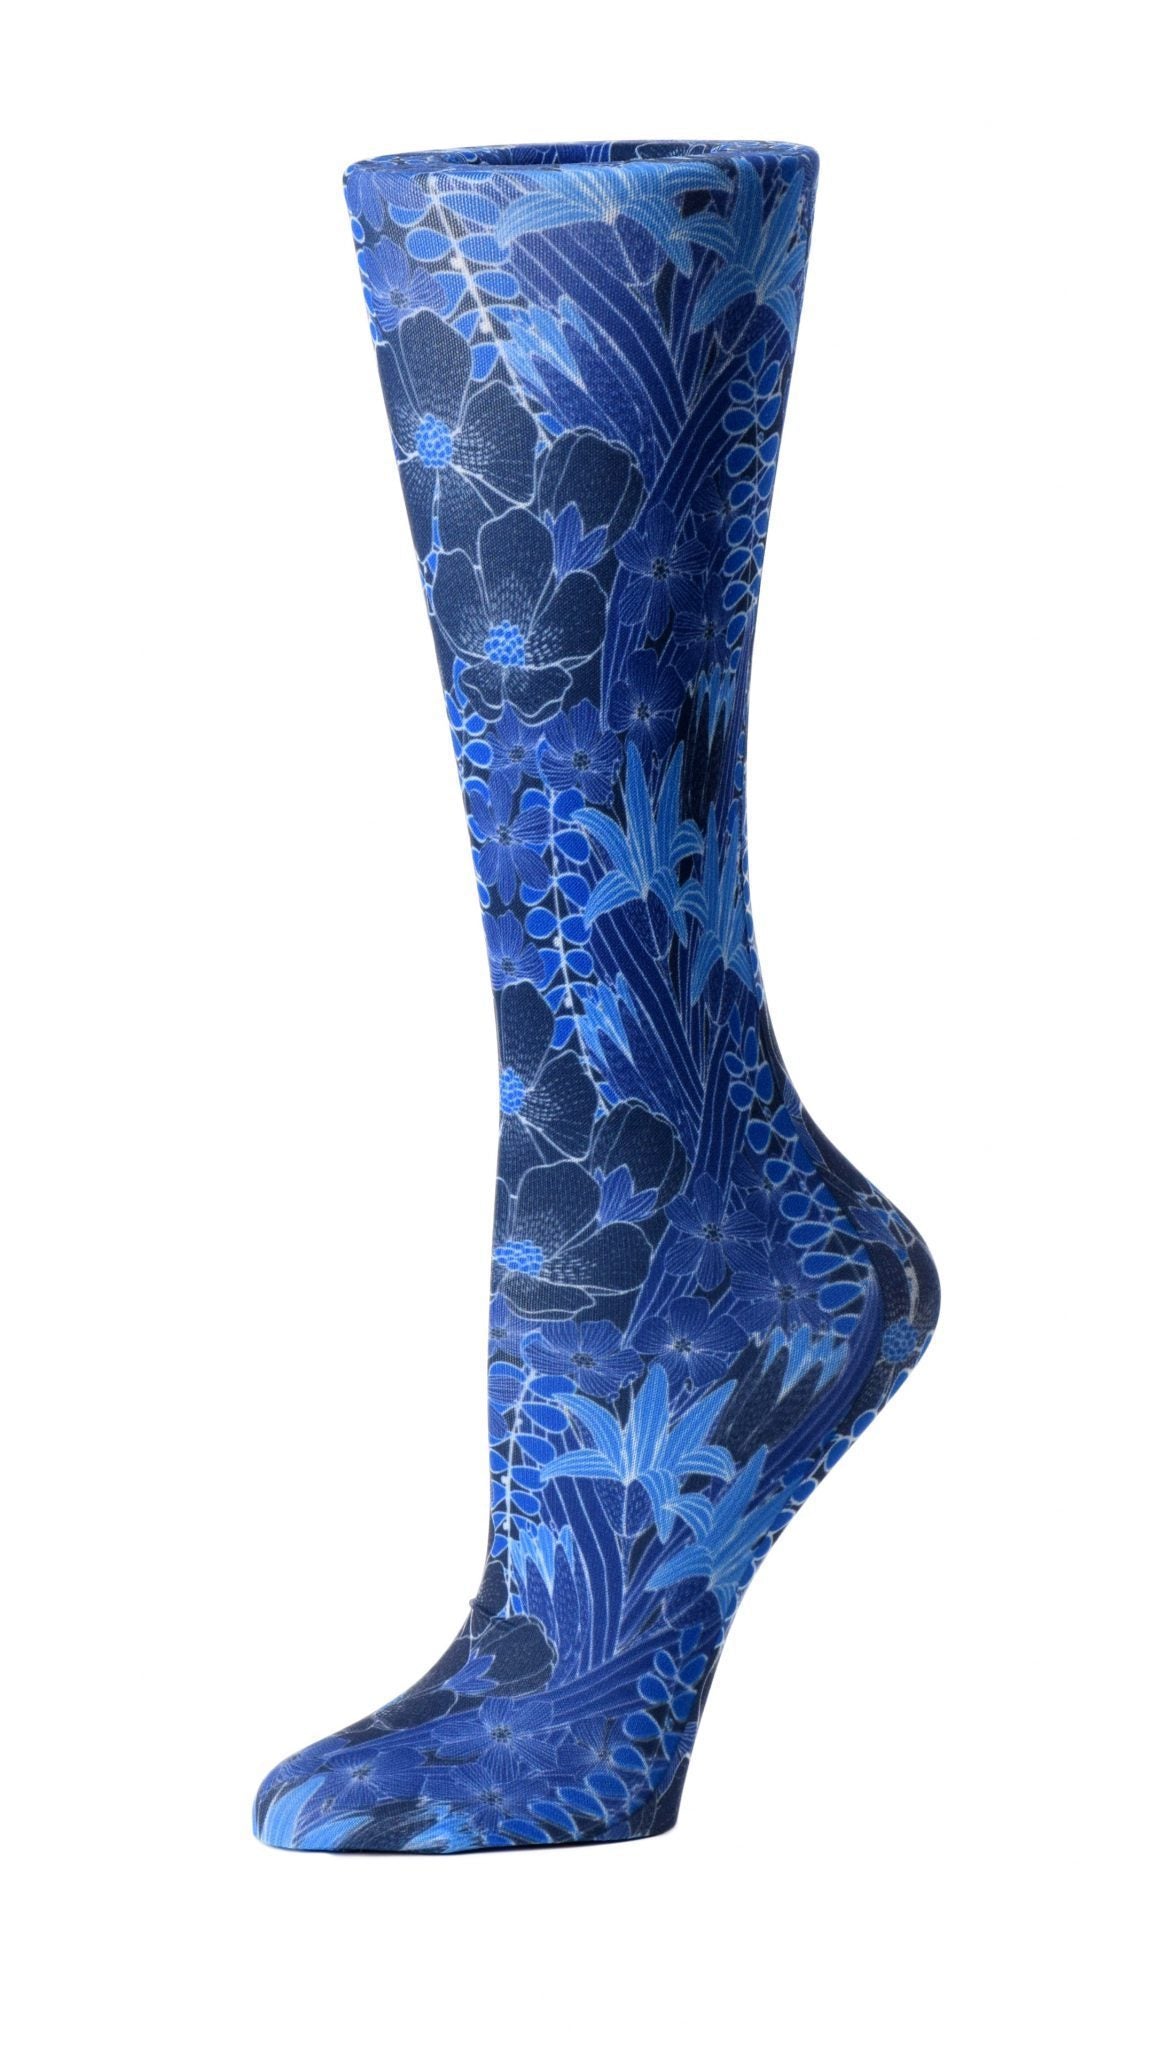 Cutieful Moderate Compression Socks 10-18 MMhg Wide Calf Knit Print Pattern Blue Flowers at Parker's Clothing and Shoes.